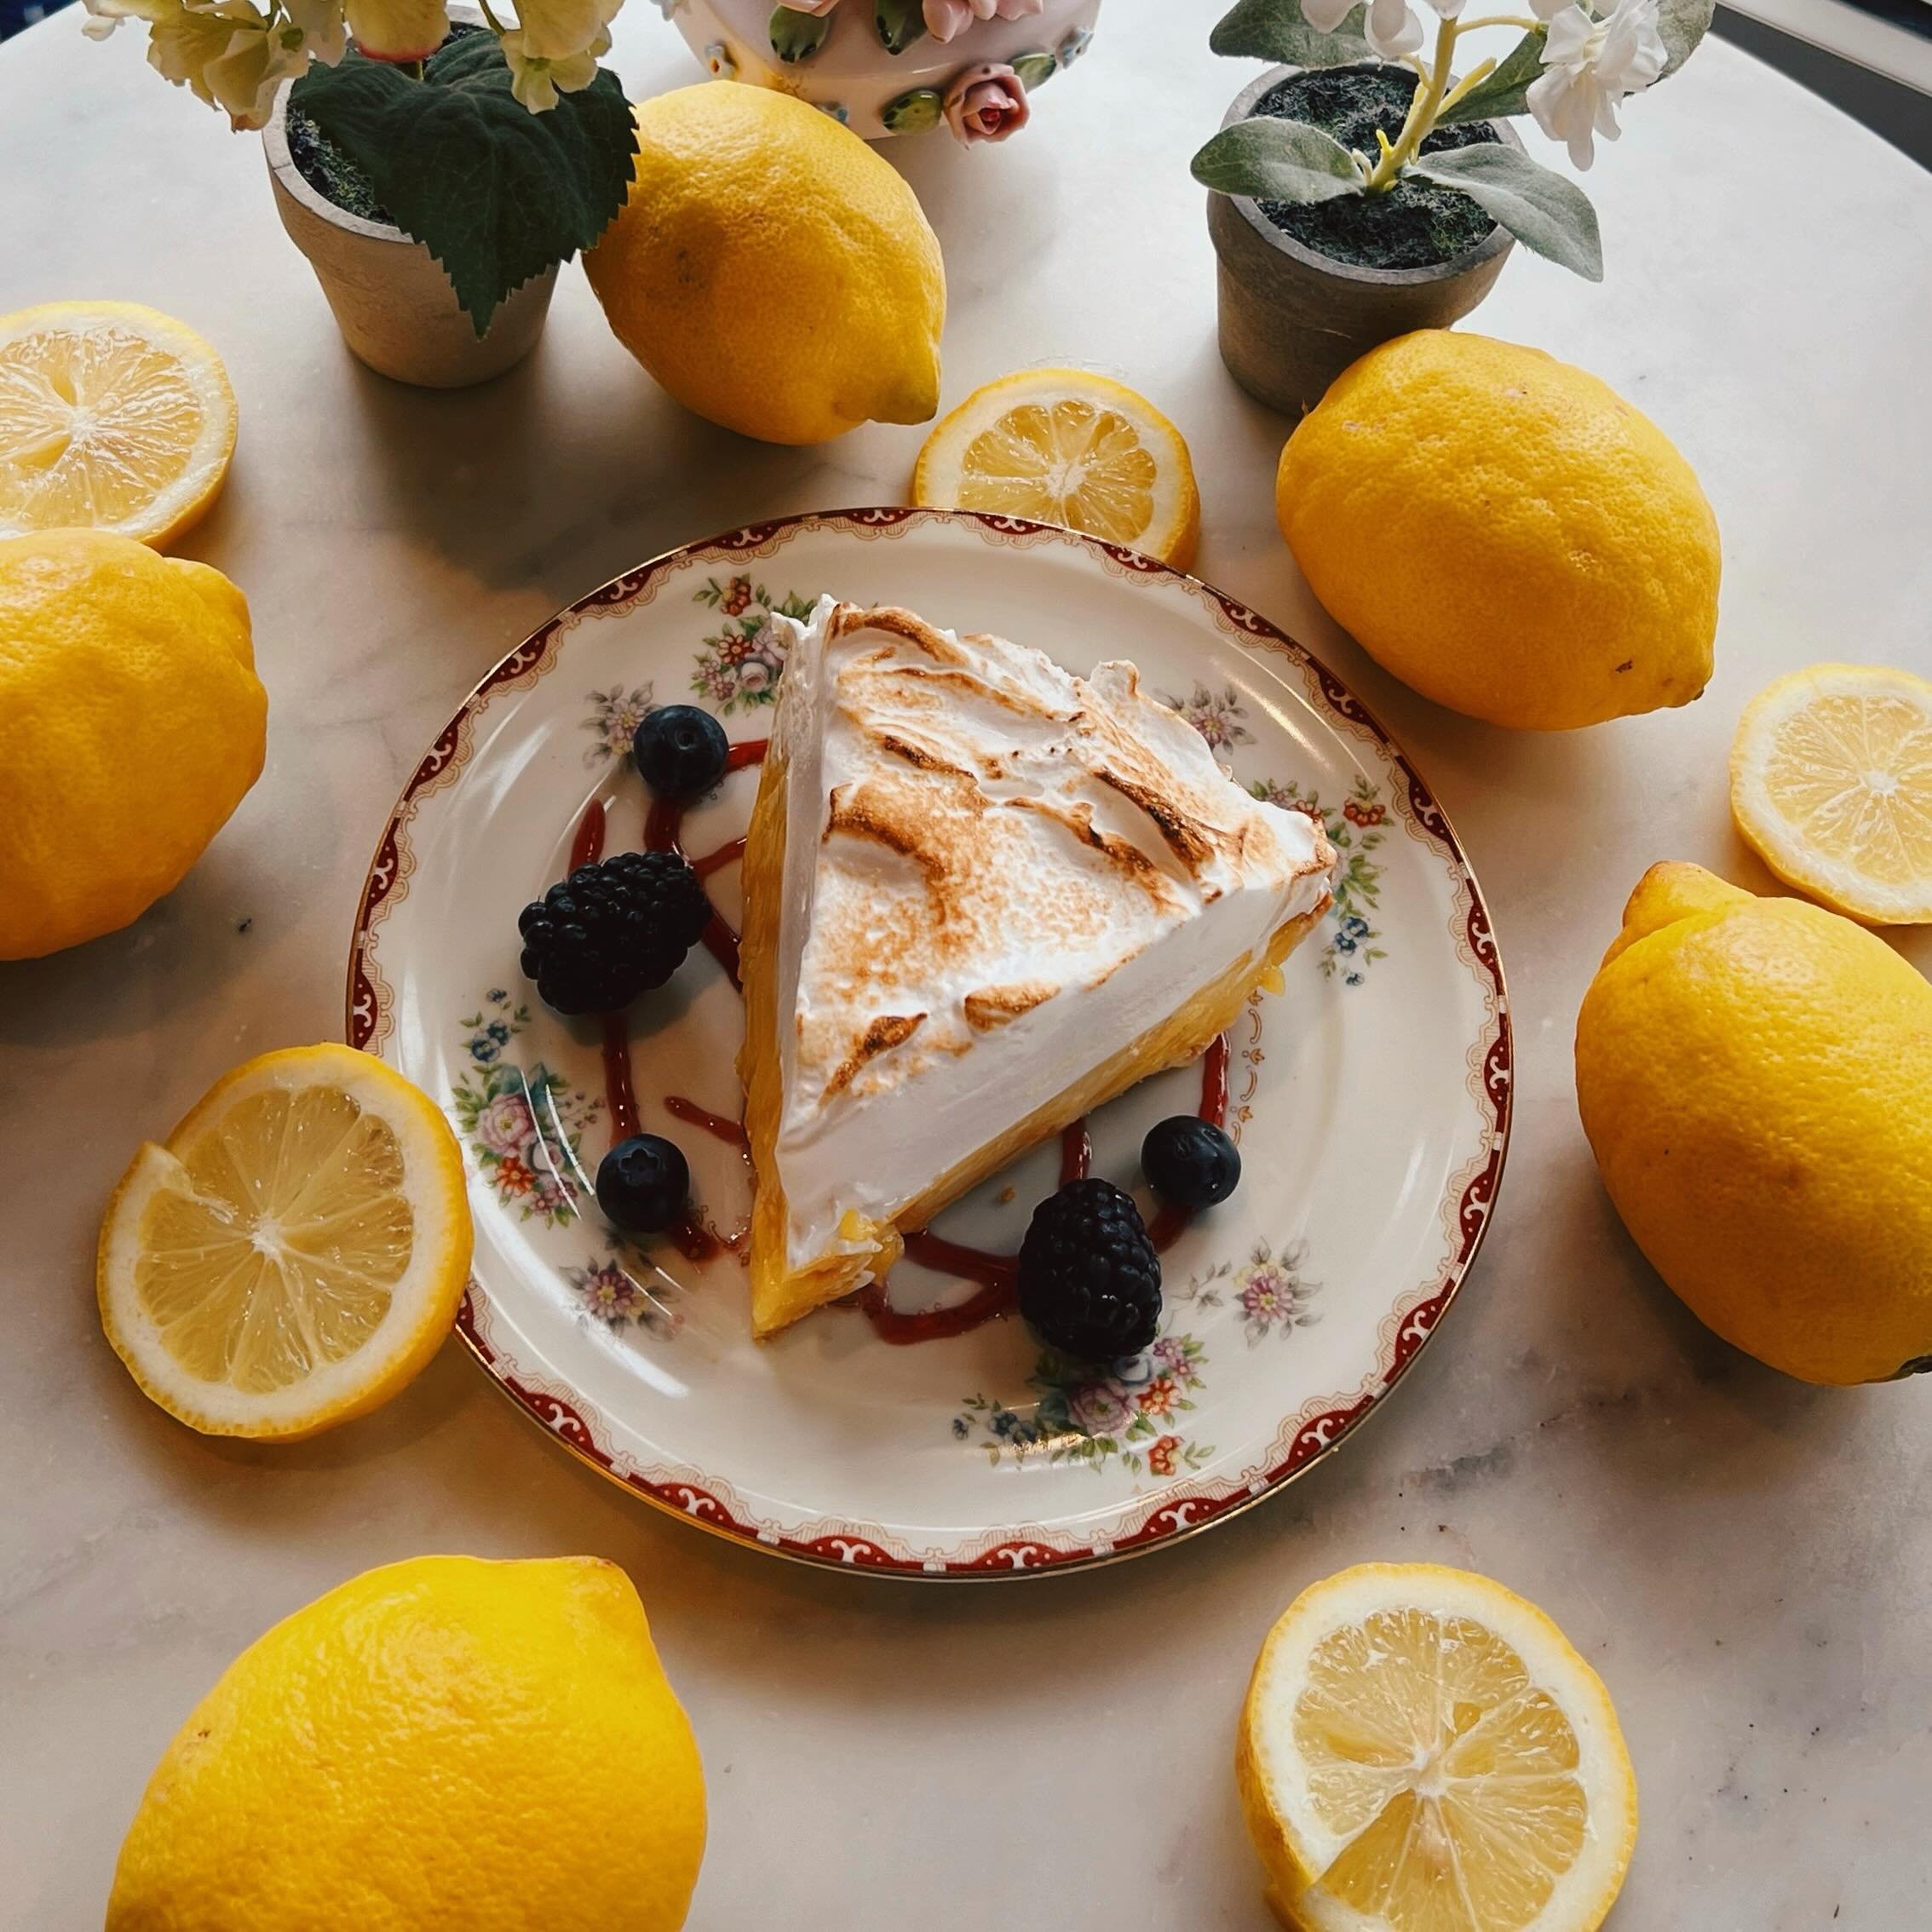 Dessert this weekend is our Lemon Meringue pie🥧🍋

Topped with fresh berries, and torched meringue - this smooth and tart delicious dessert is a great refreshing start to your summer months &hearts;️

#DessertDuJour #DowntownArlingtonHeights #BluLov